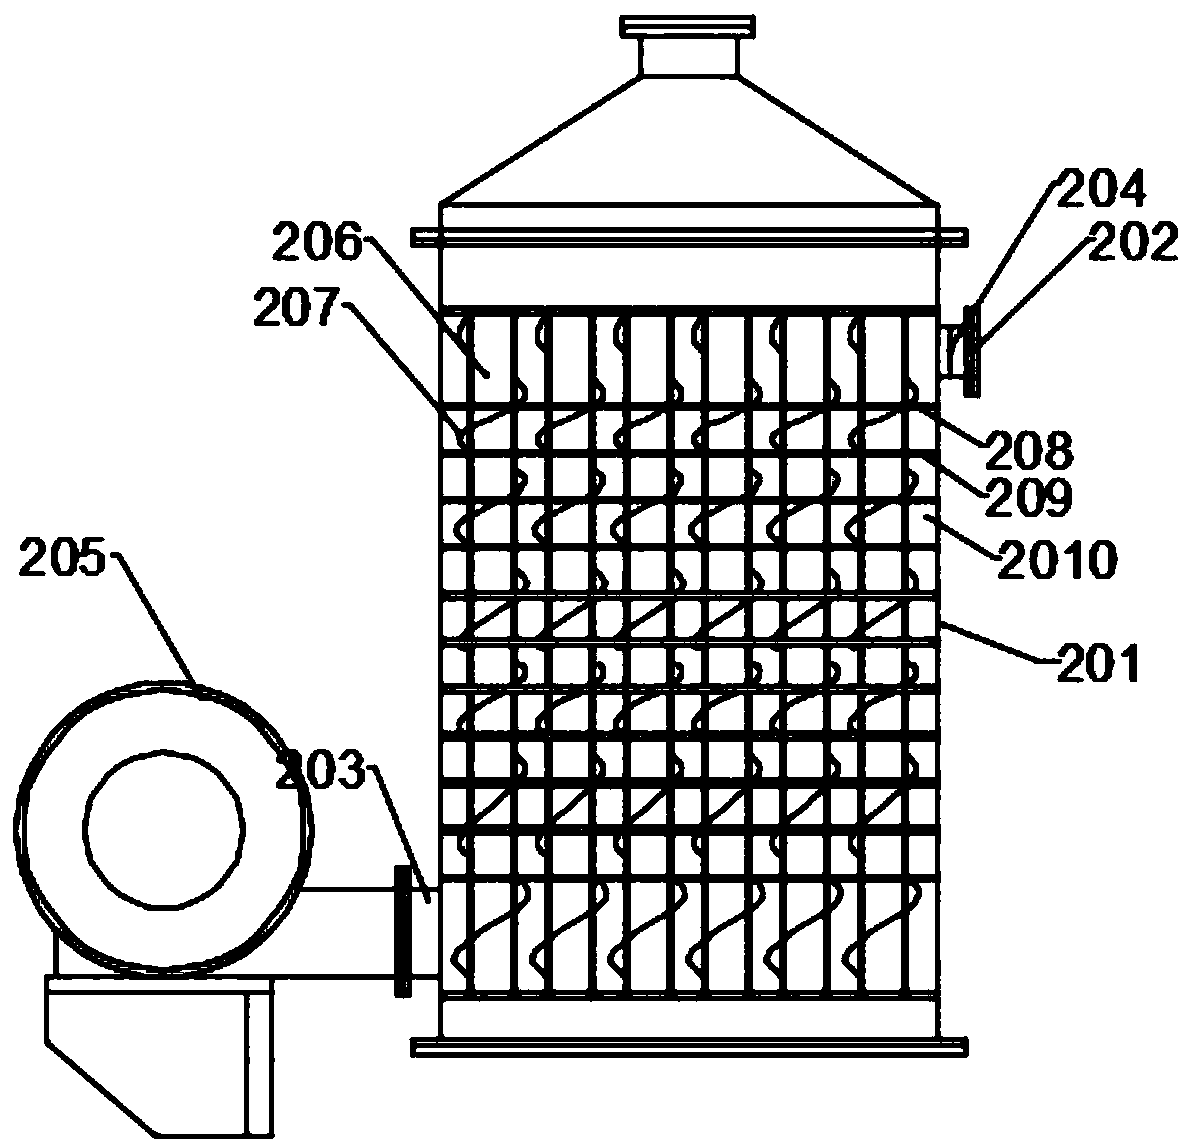 Waste incineration device